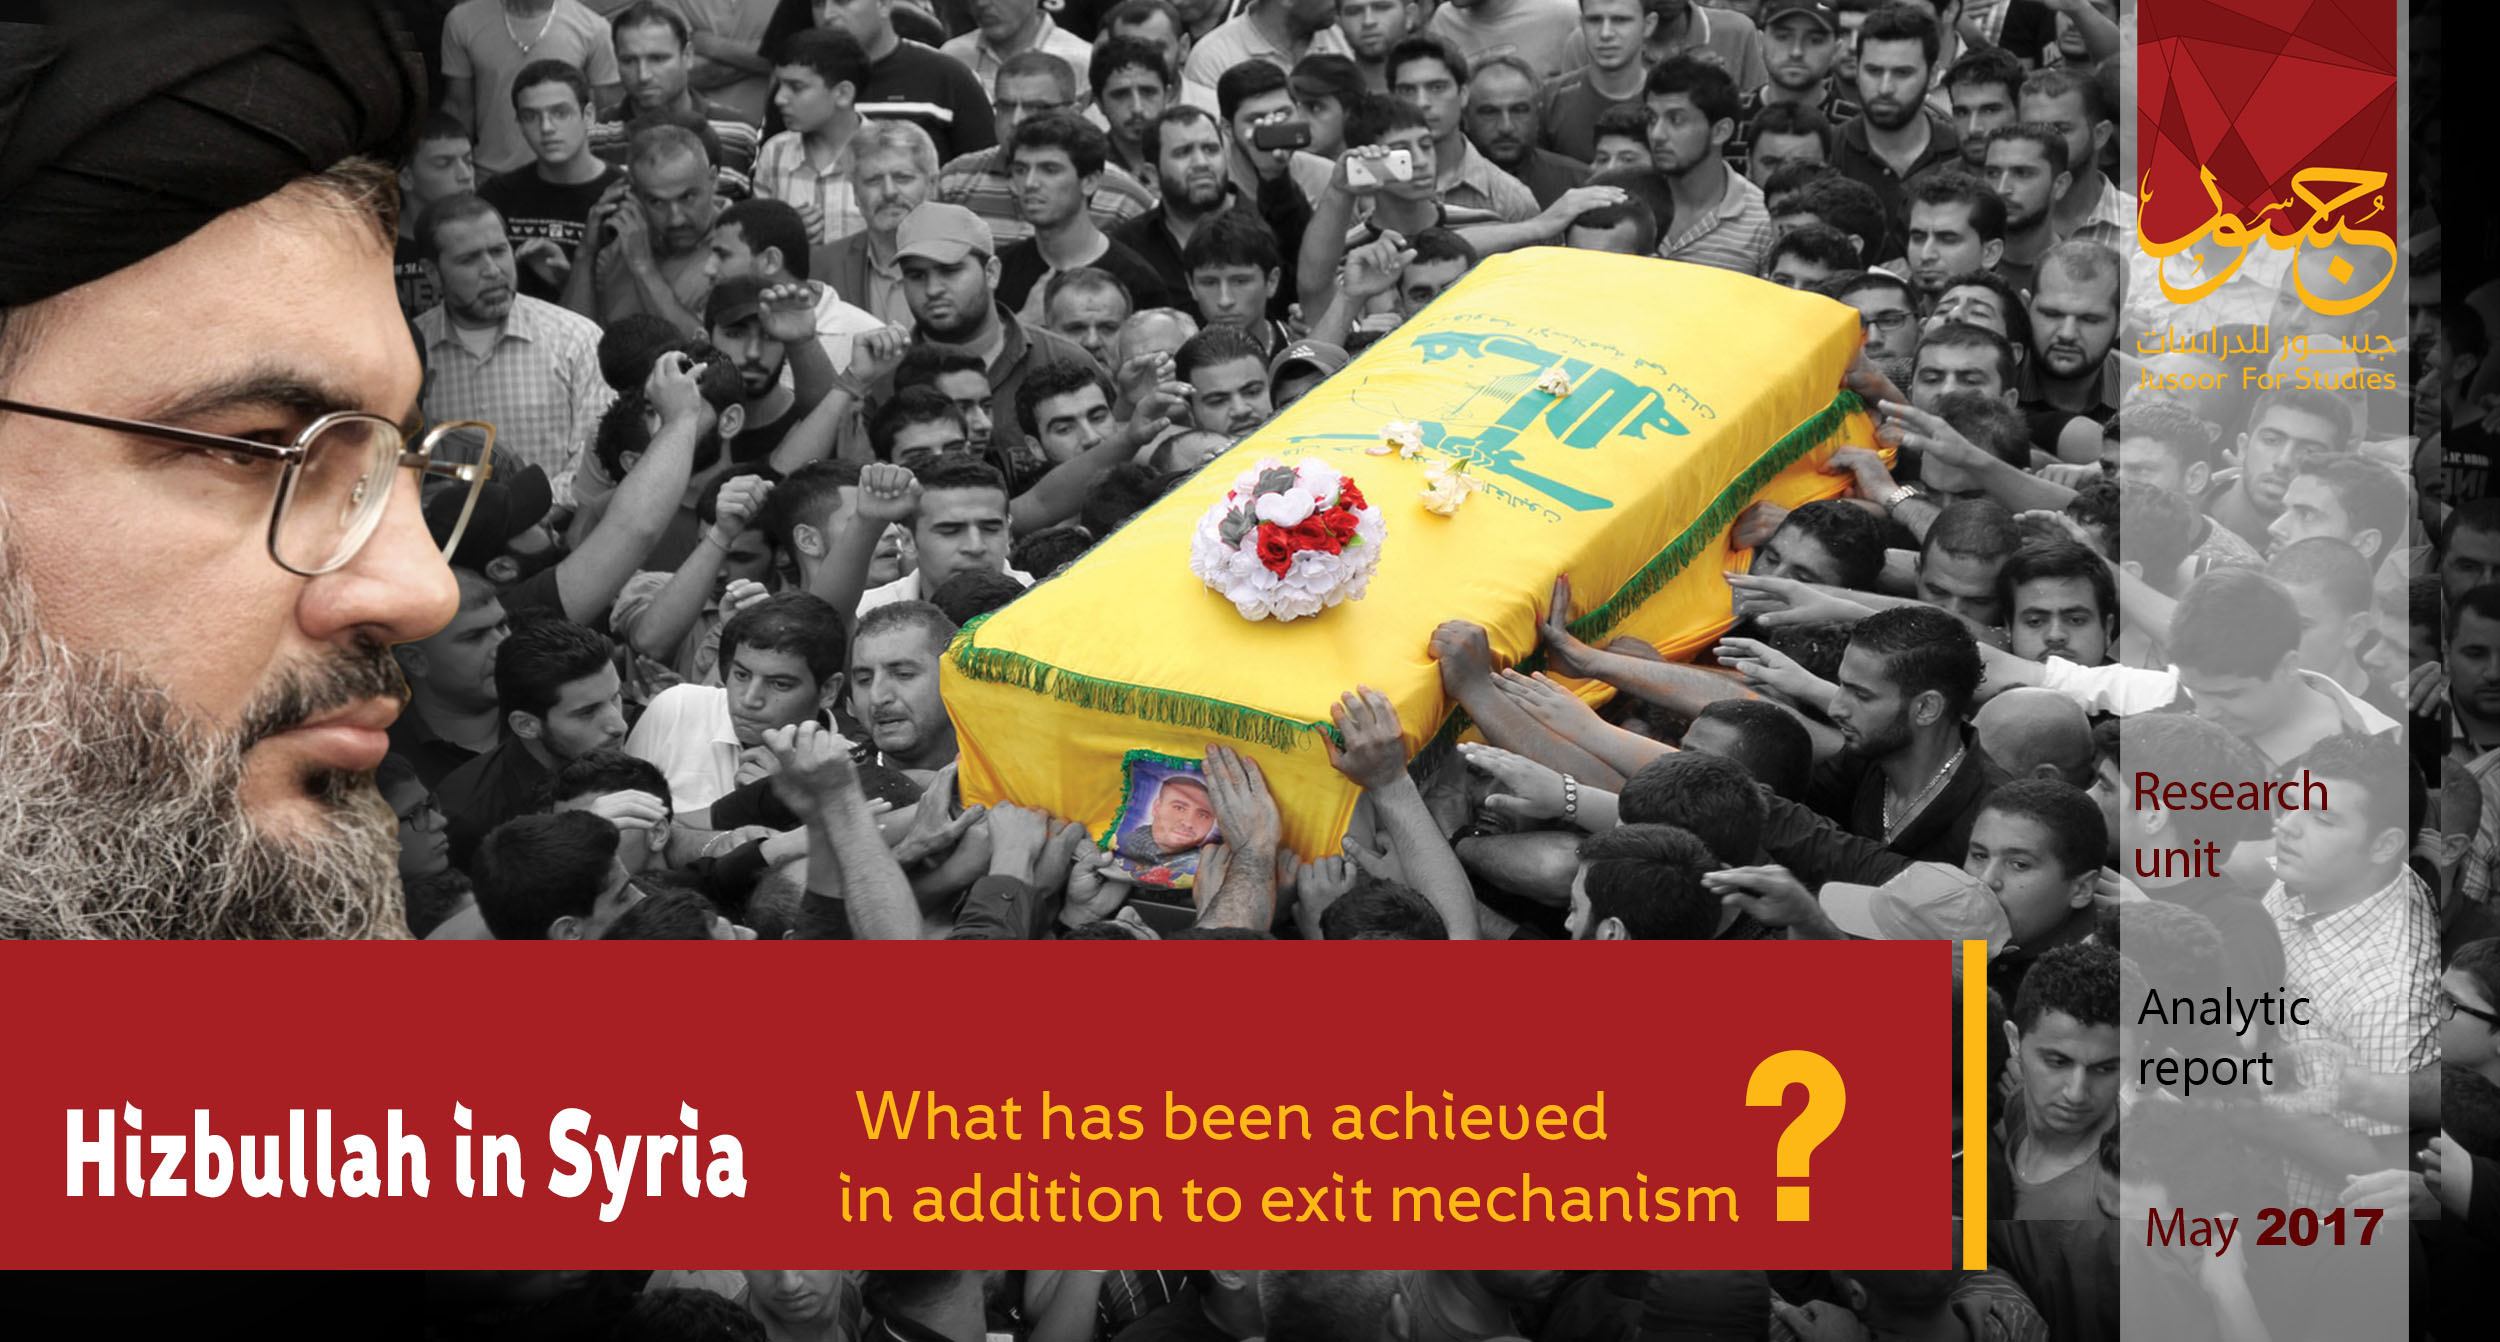 Hezbollah in Syria: What has been achieved in addition to exit mechanism? 